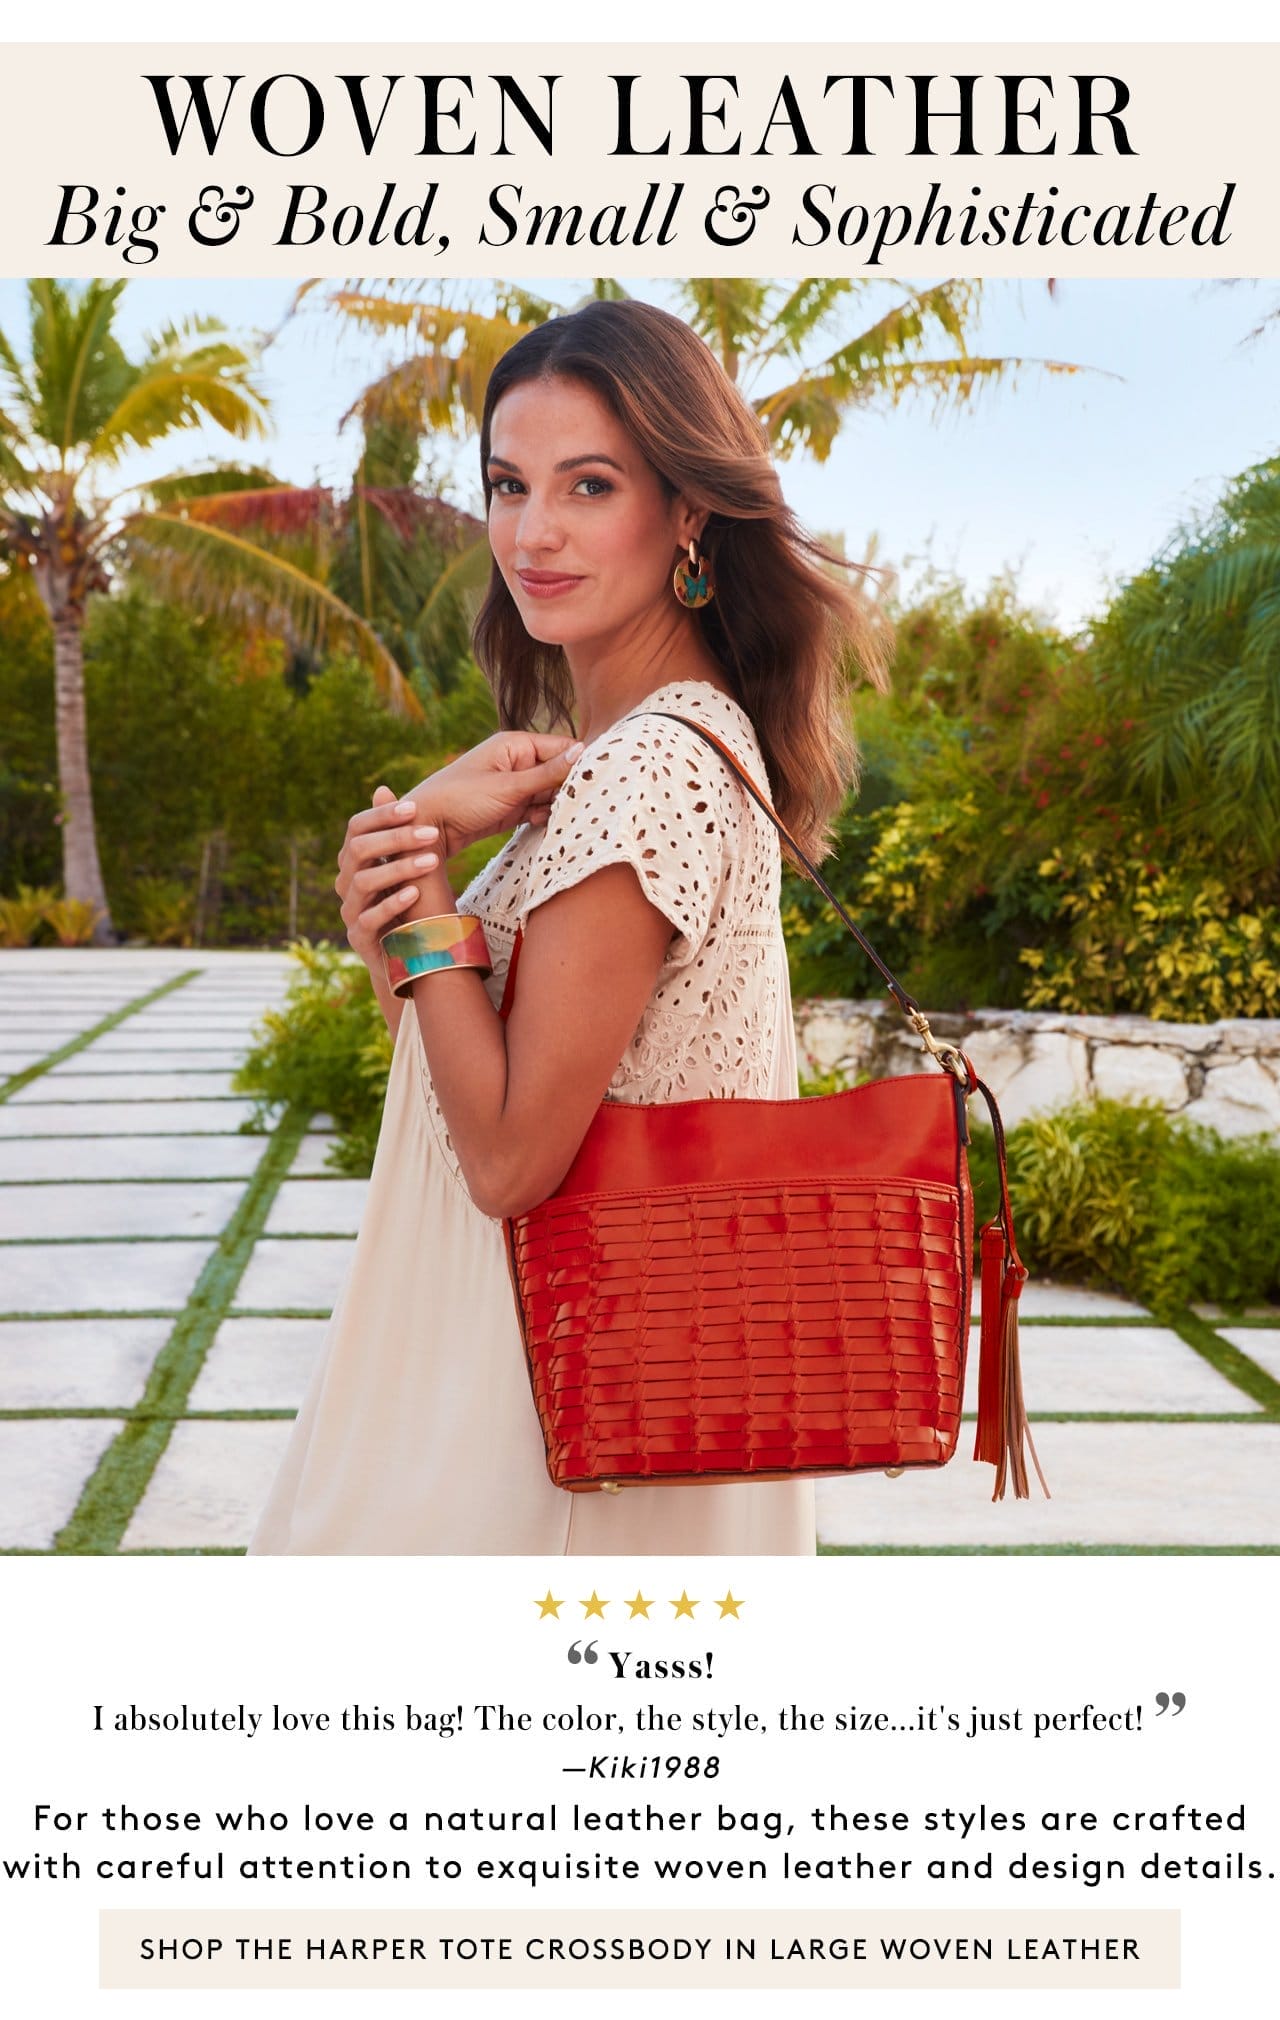 Woven Leather. Big & Bold, Small & Sophisticated. 5 Stars. “Yasss! I absolutely love this bag! The color, the style, the size...it's just perfect! ” —Kiki1988. For those who love a natural leather bag, these styles are crafted with careful attention to exquisite woven leather and design details. Shop the Harper Tote Crossbody in Large Woven Leather